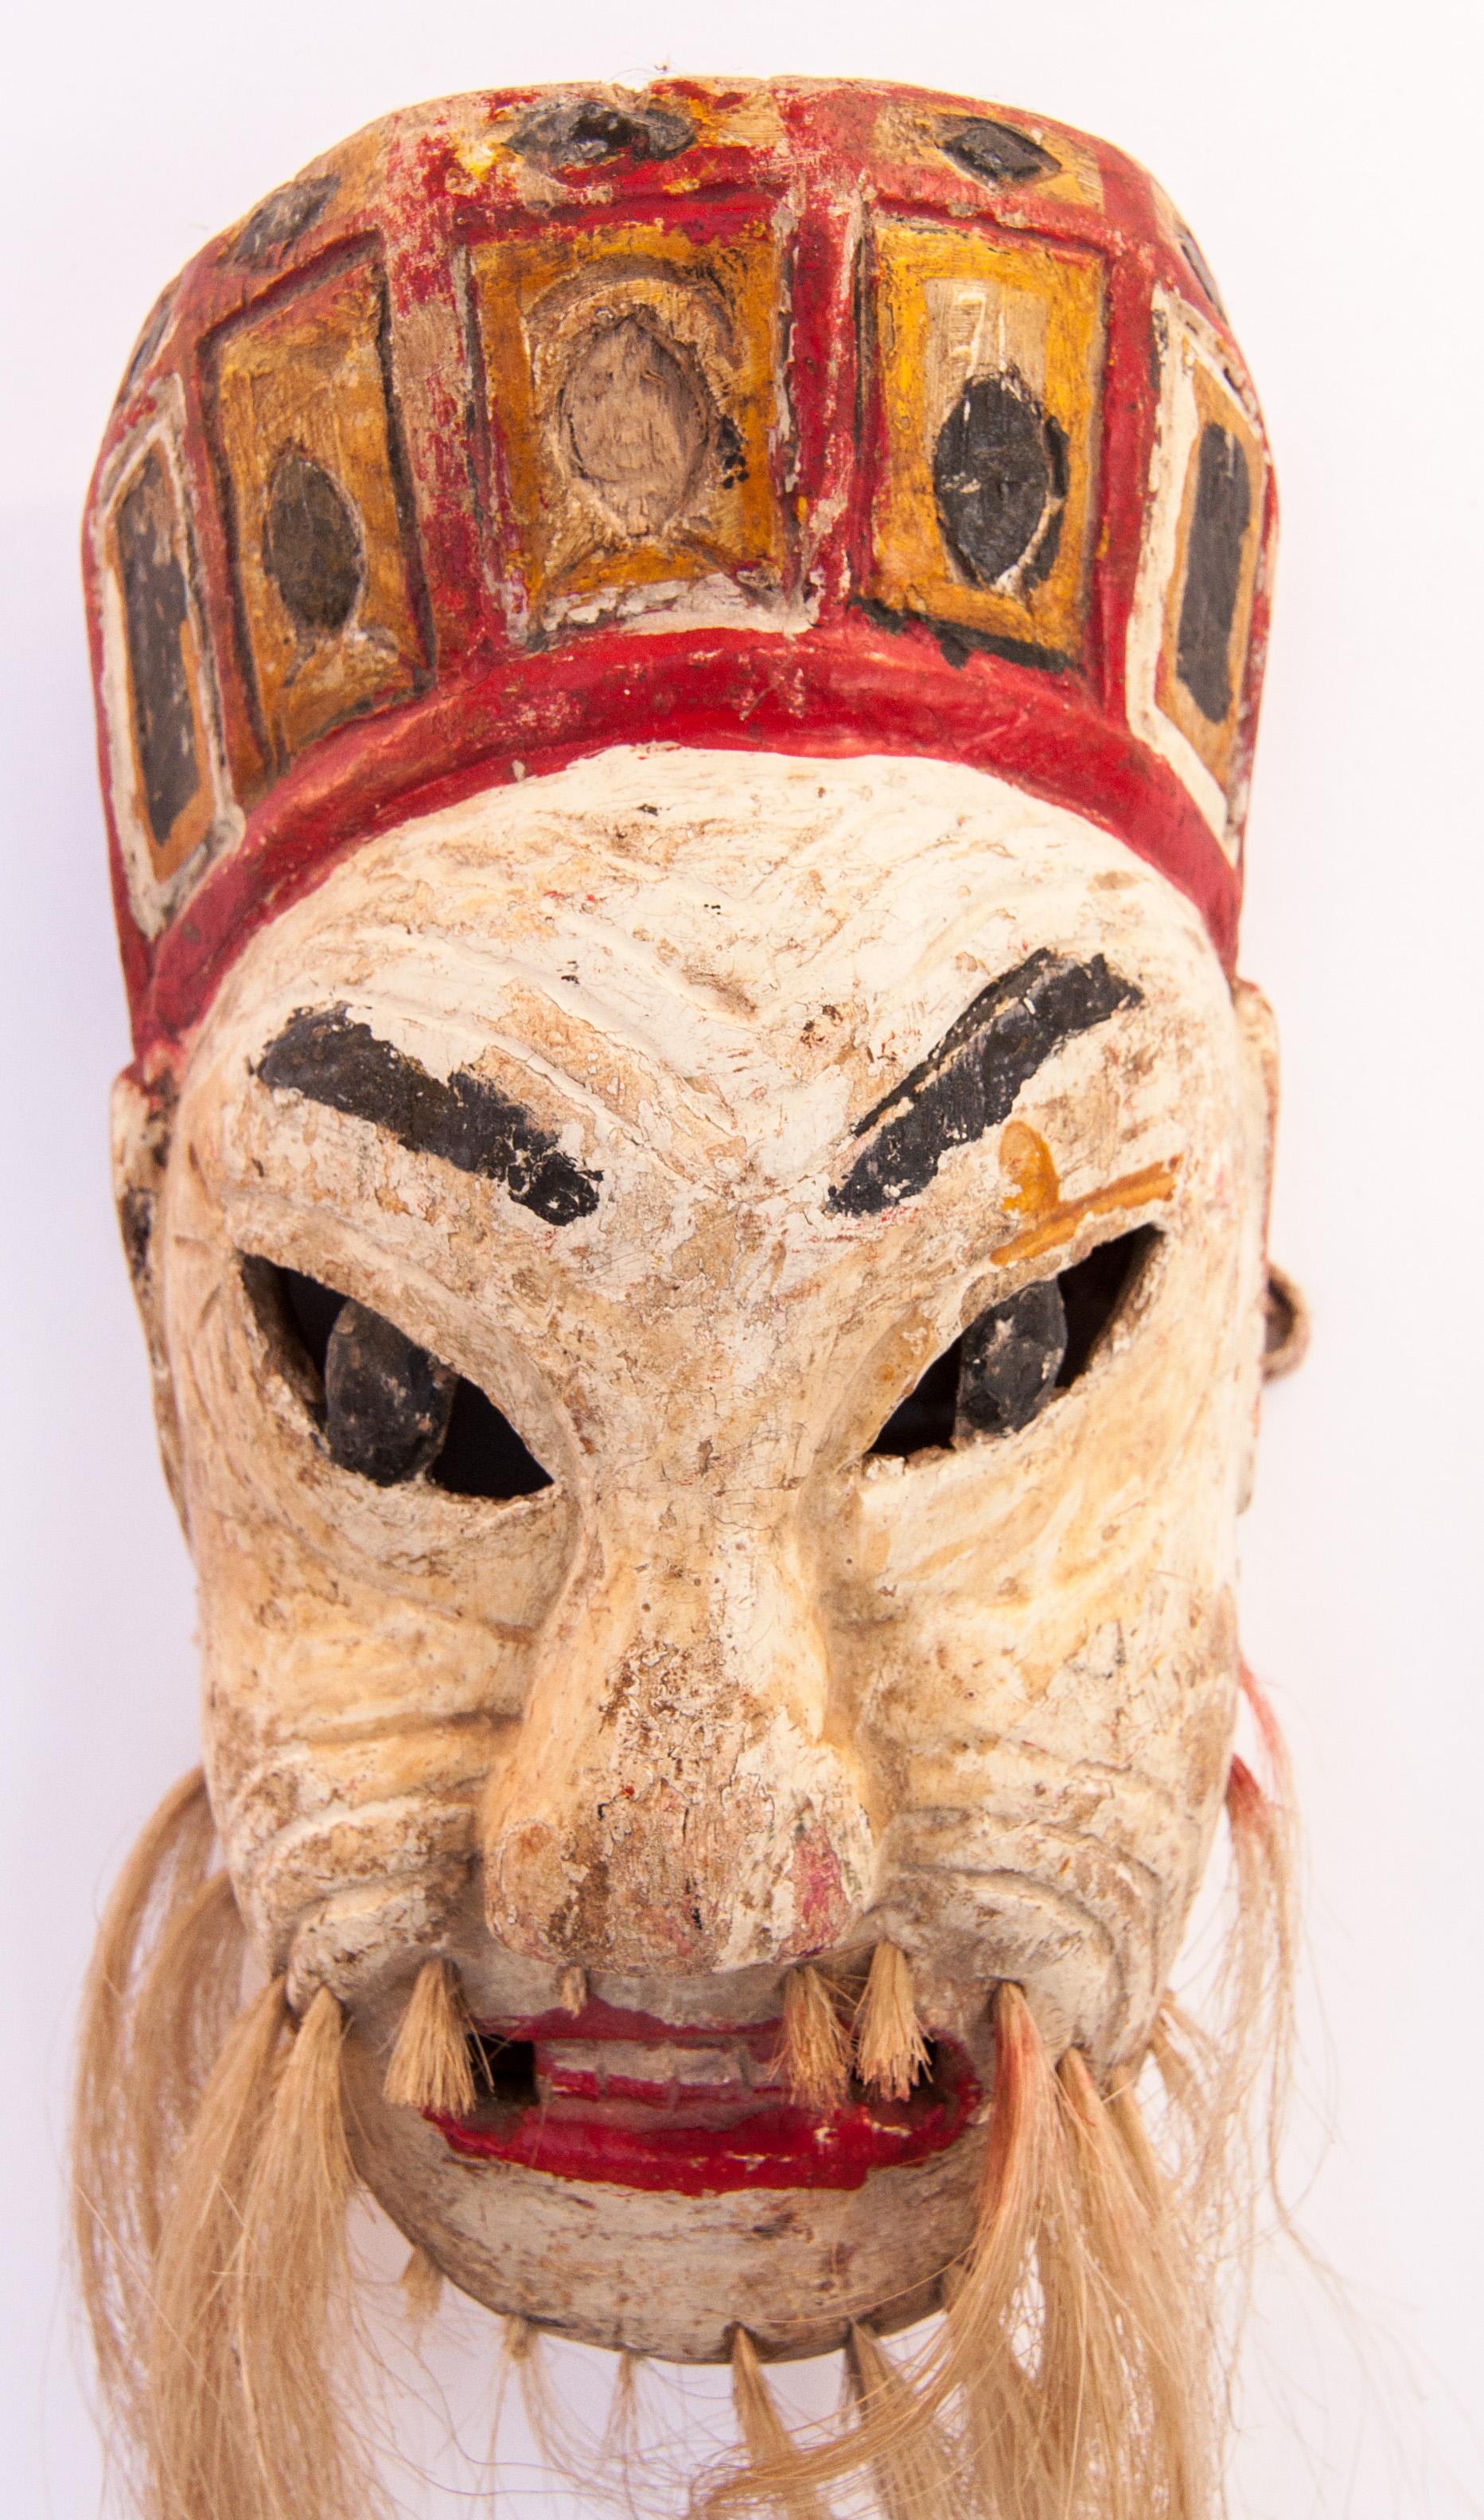 Vintage Nuo theater or ceremonial performance mask from Guizhou, South China, mid-20th century.
Nuo refers literally to a kind of exorcism, or driving out of spirits. Nuo theater and dance dramas were performed on the fourth day of the annual Nuo